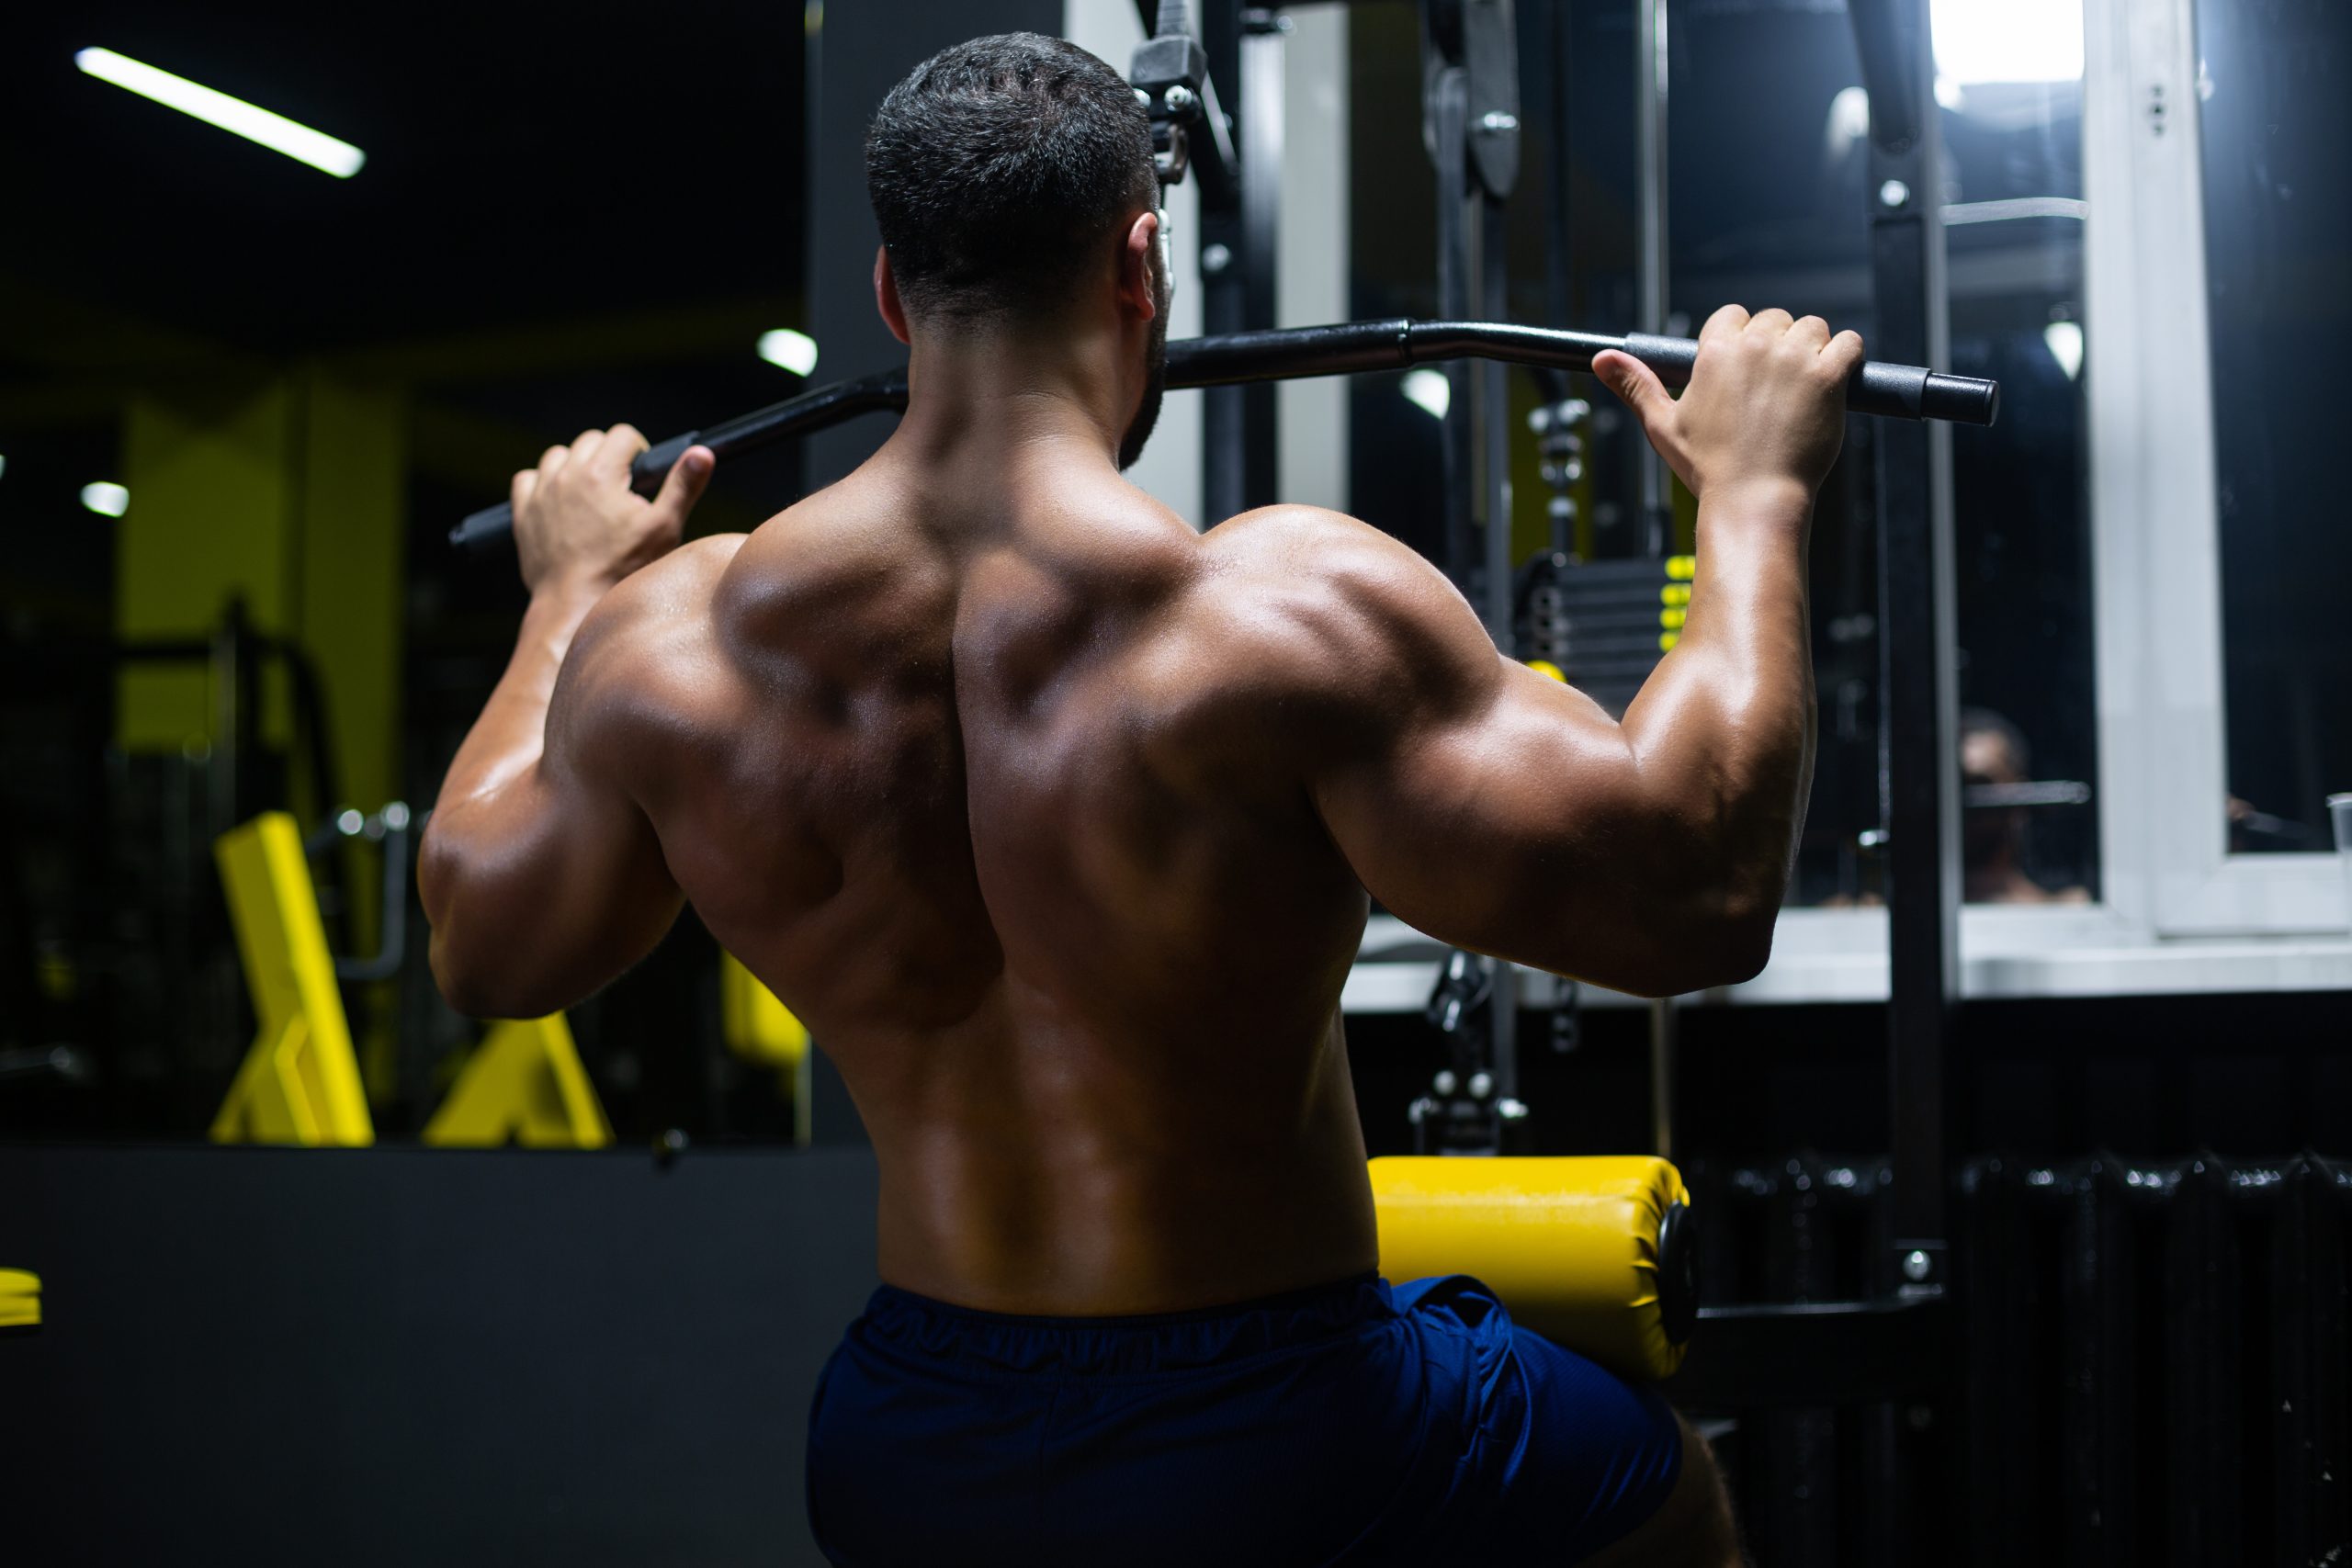 These Are the 8 Best Lower Back Exercises for Bodybuilding